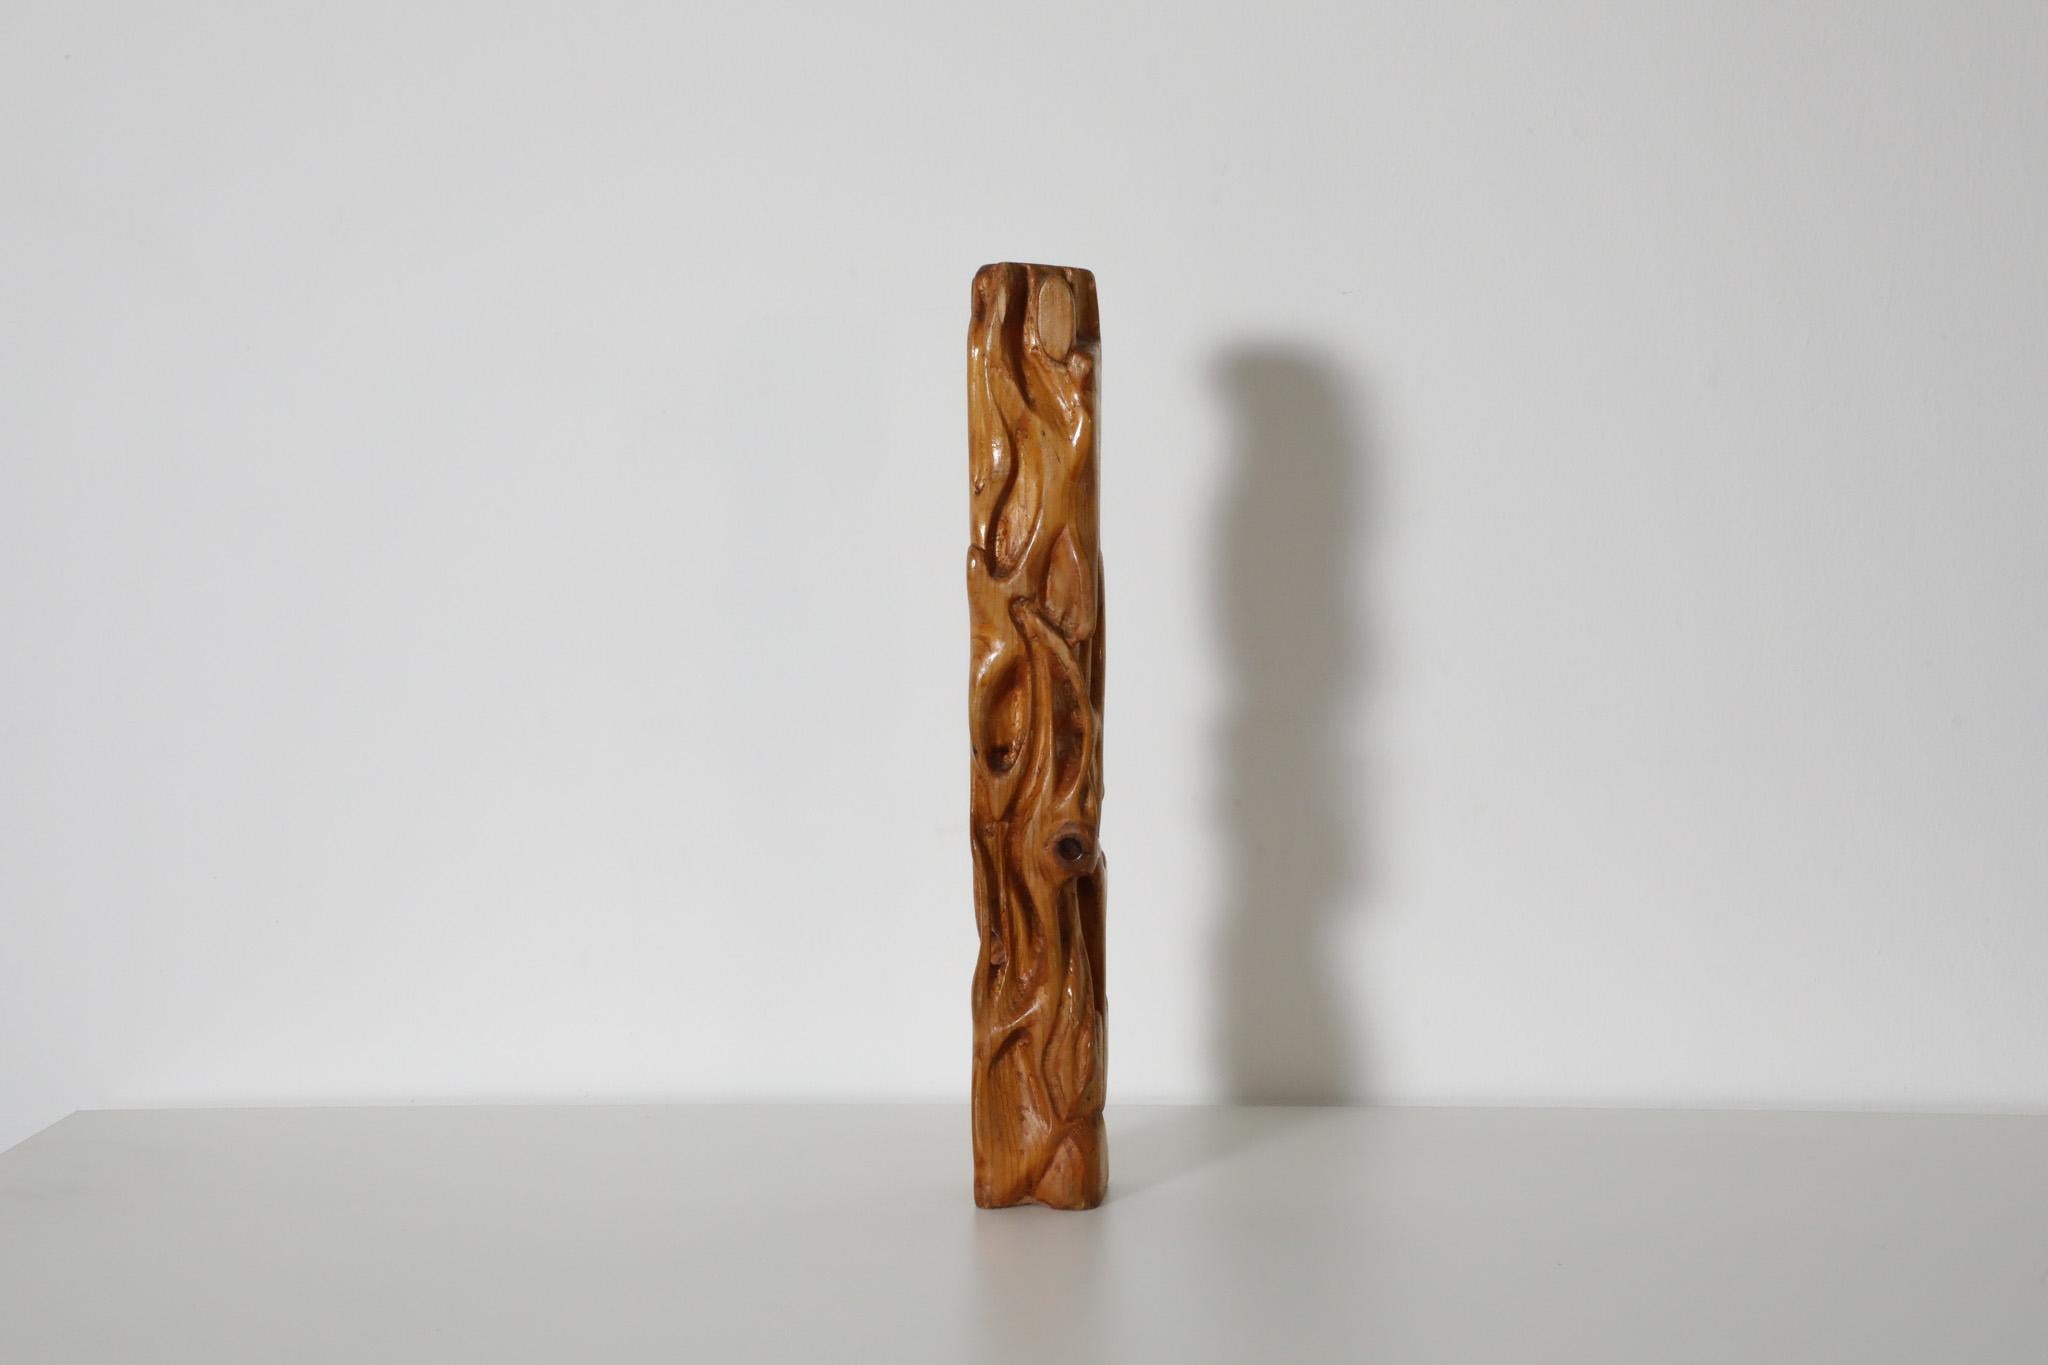 Unique, Mid-Century pine totem sculpture. A beautifully carved abstract home accessory adorned with intricate detail. In original condition with visible wear consistent with its age and use.